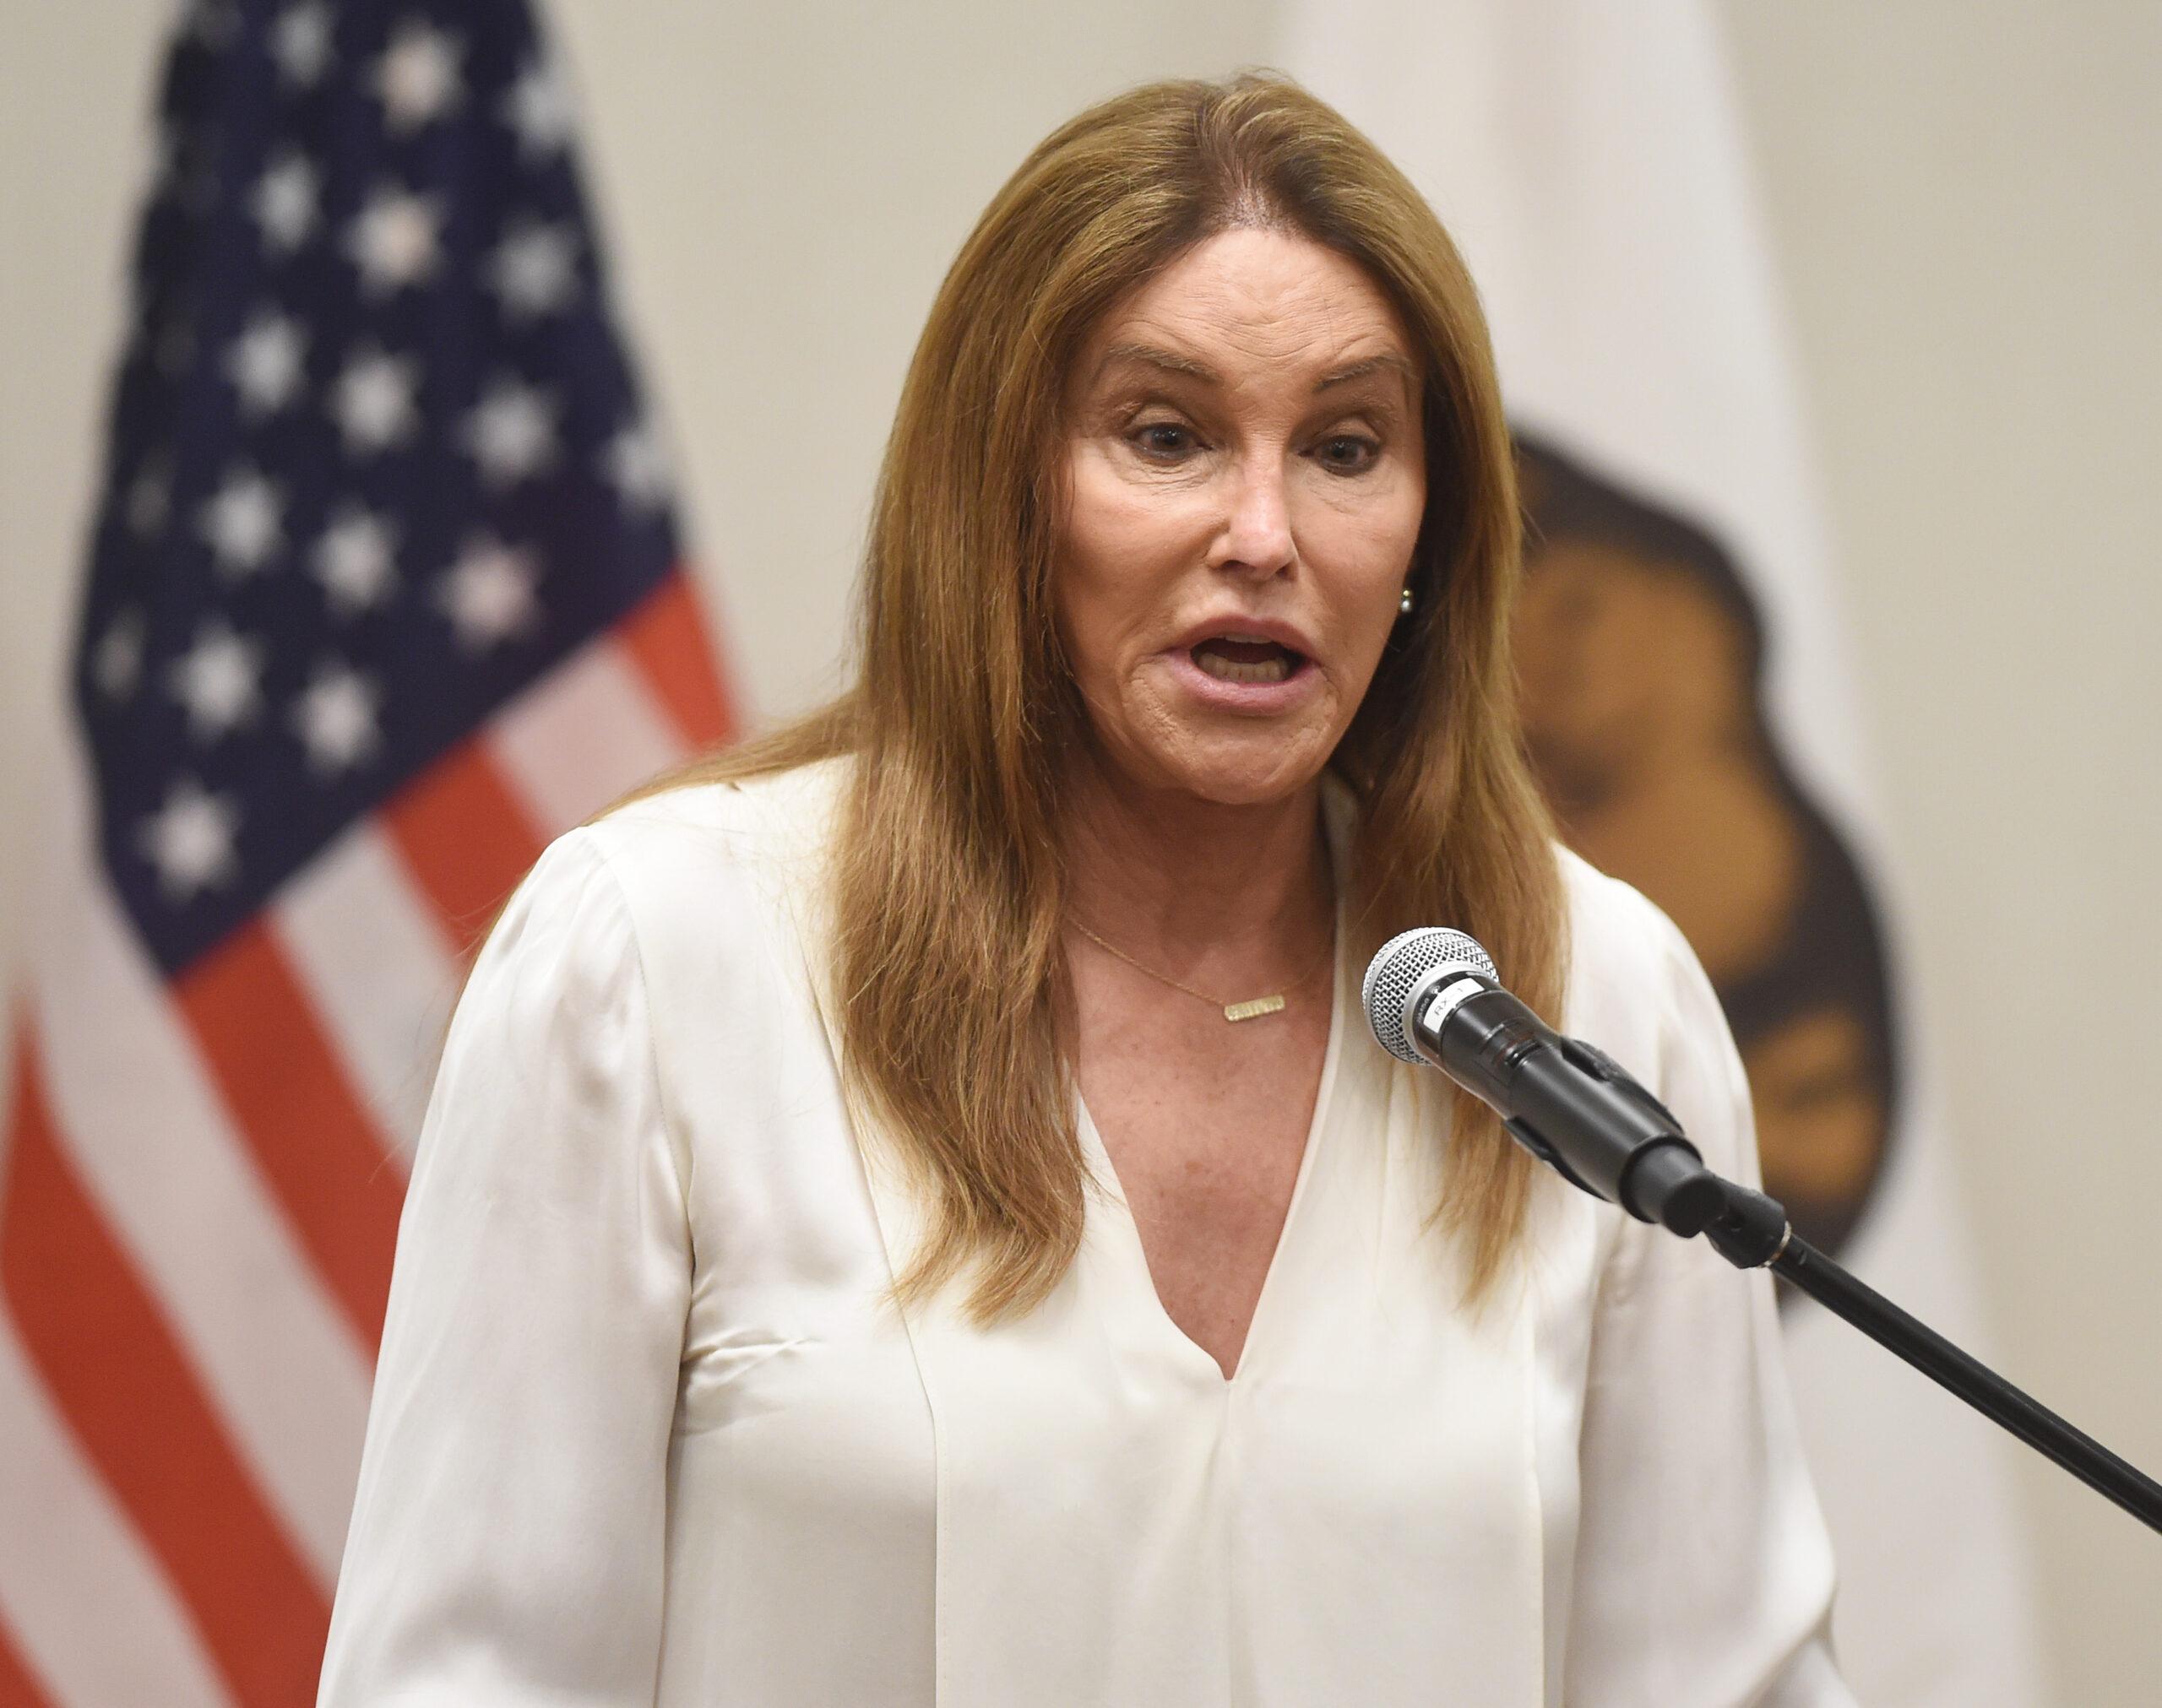 Caitlyn Jenner for California Governor Pasadena Town Hall